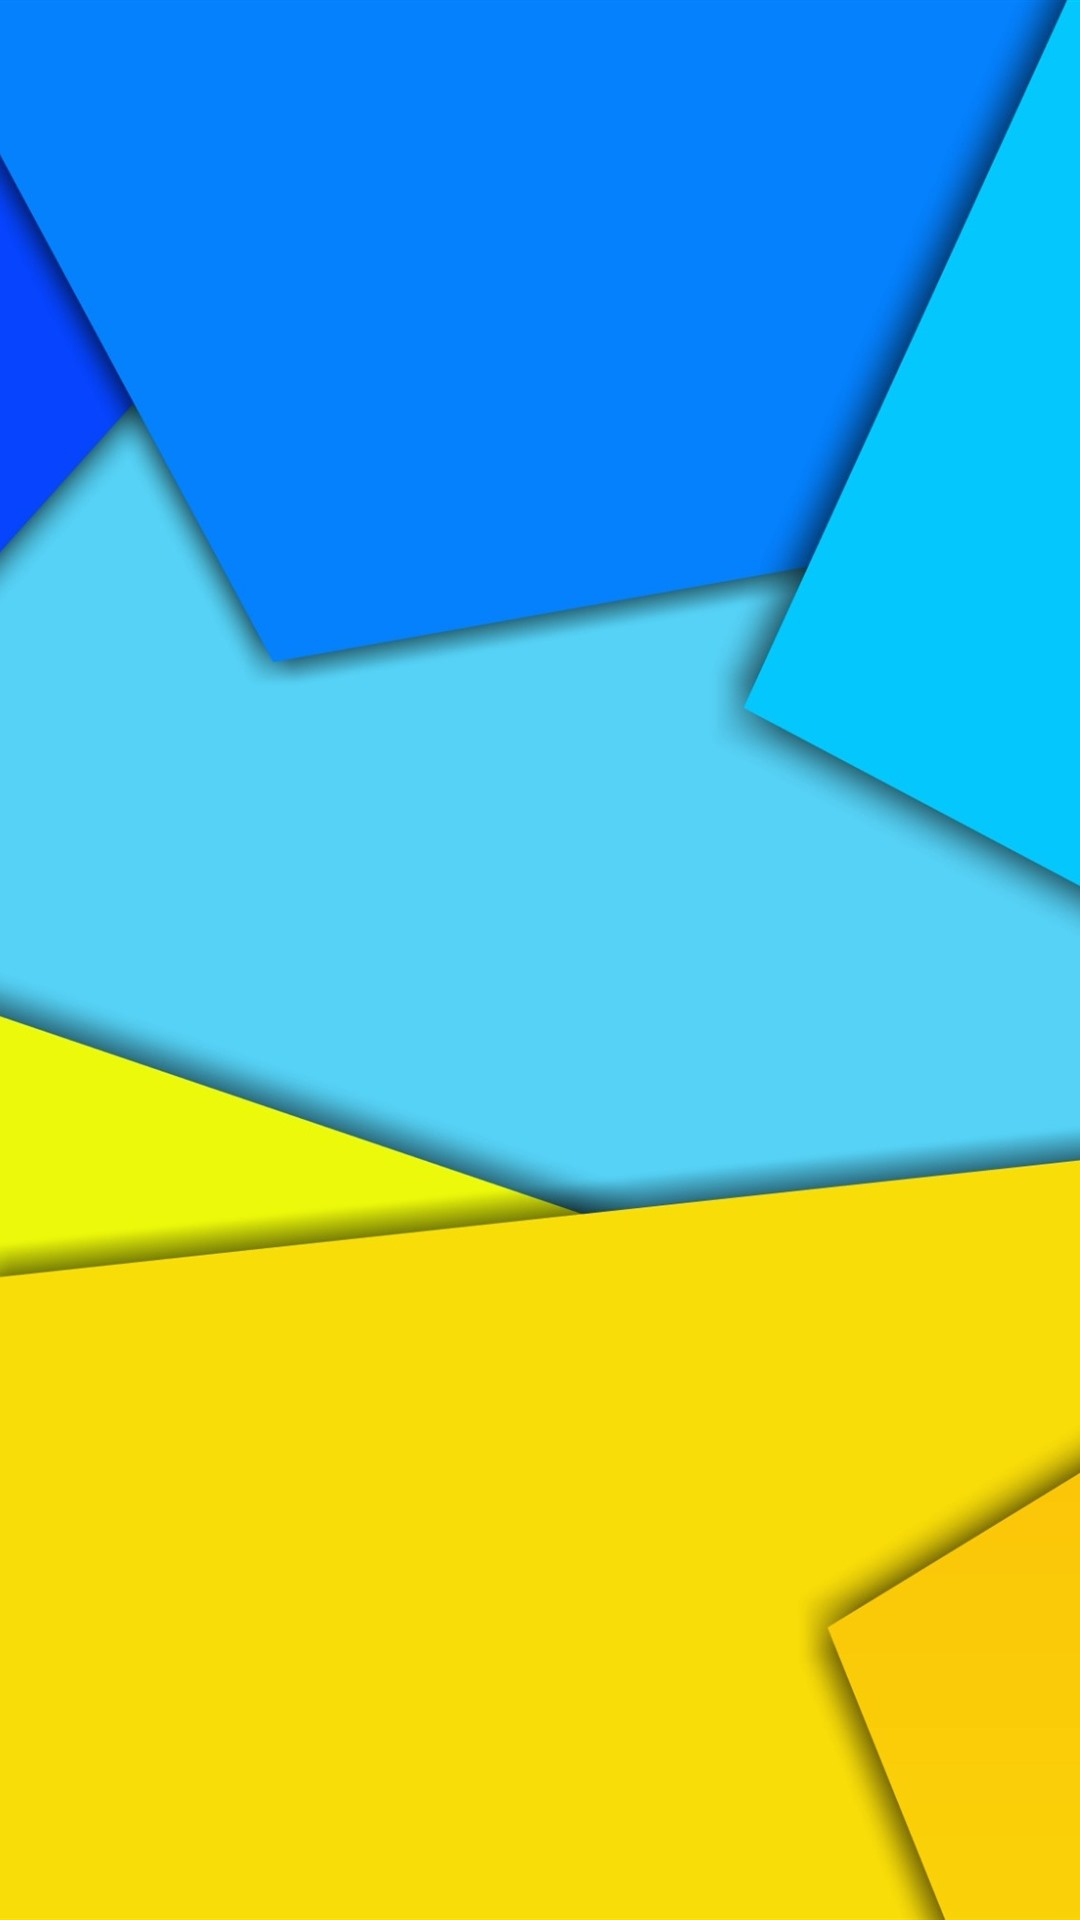 1080x1920 Blue and Yellow Geometric Wallpapers Top Free Blue and Yellow Geometric Backgrounds